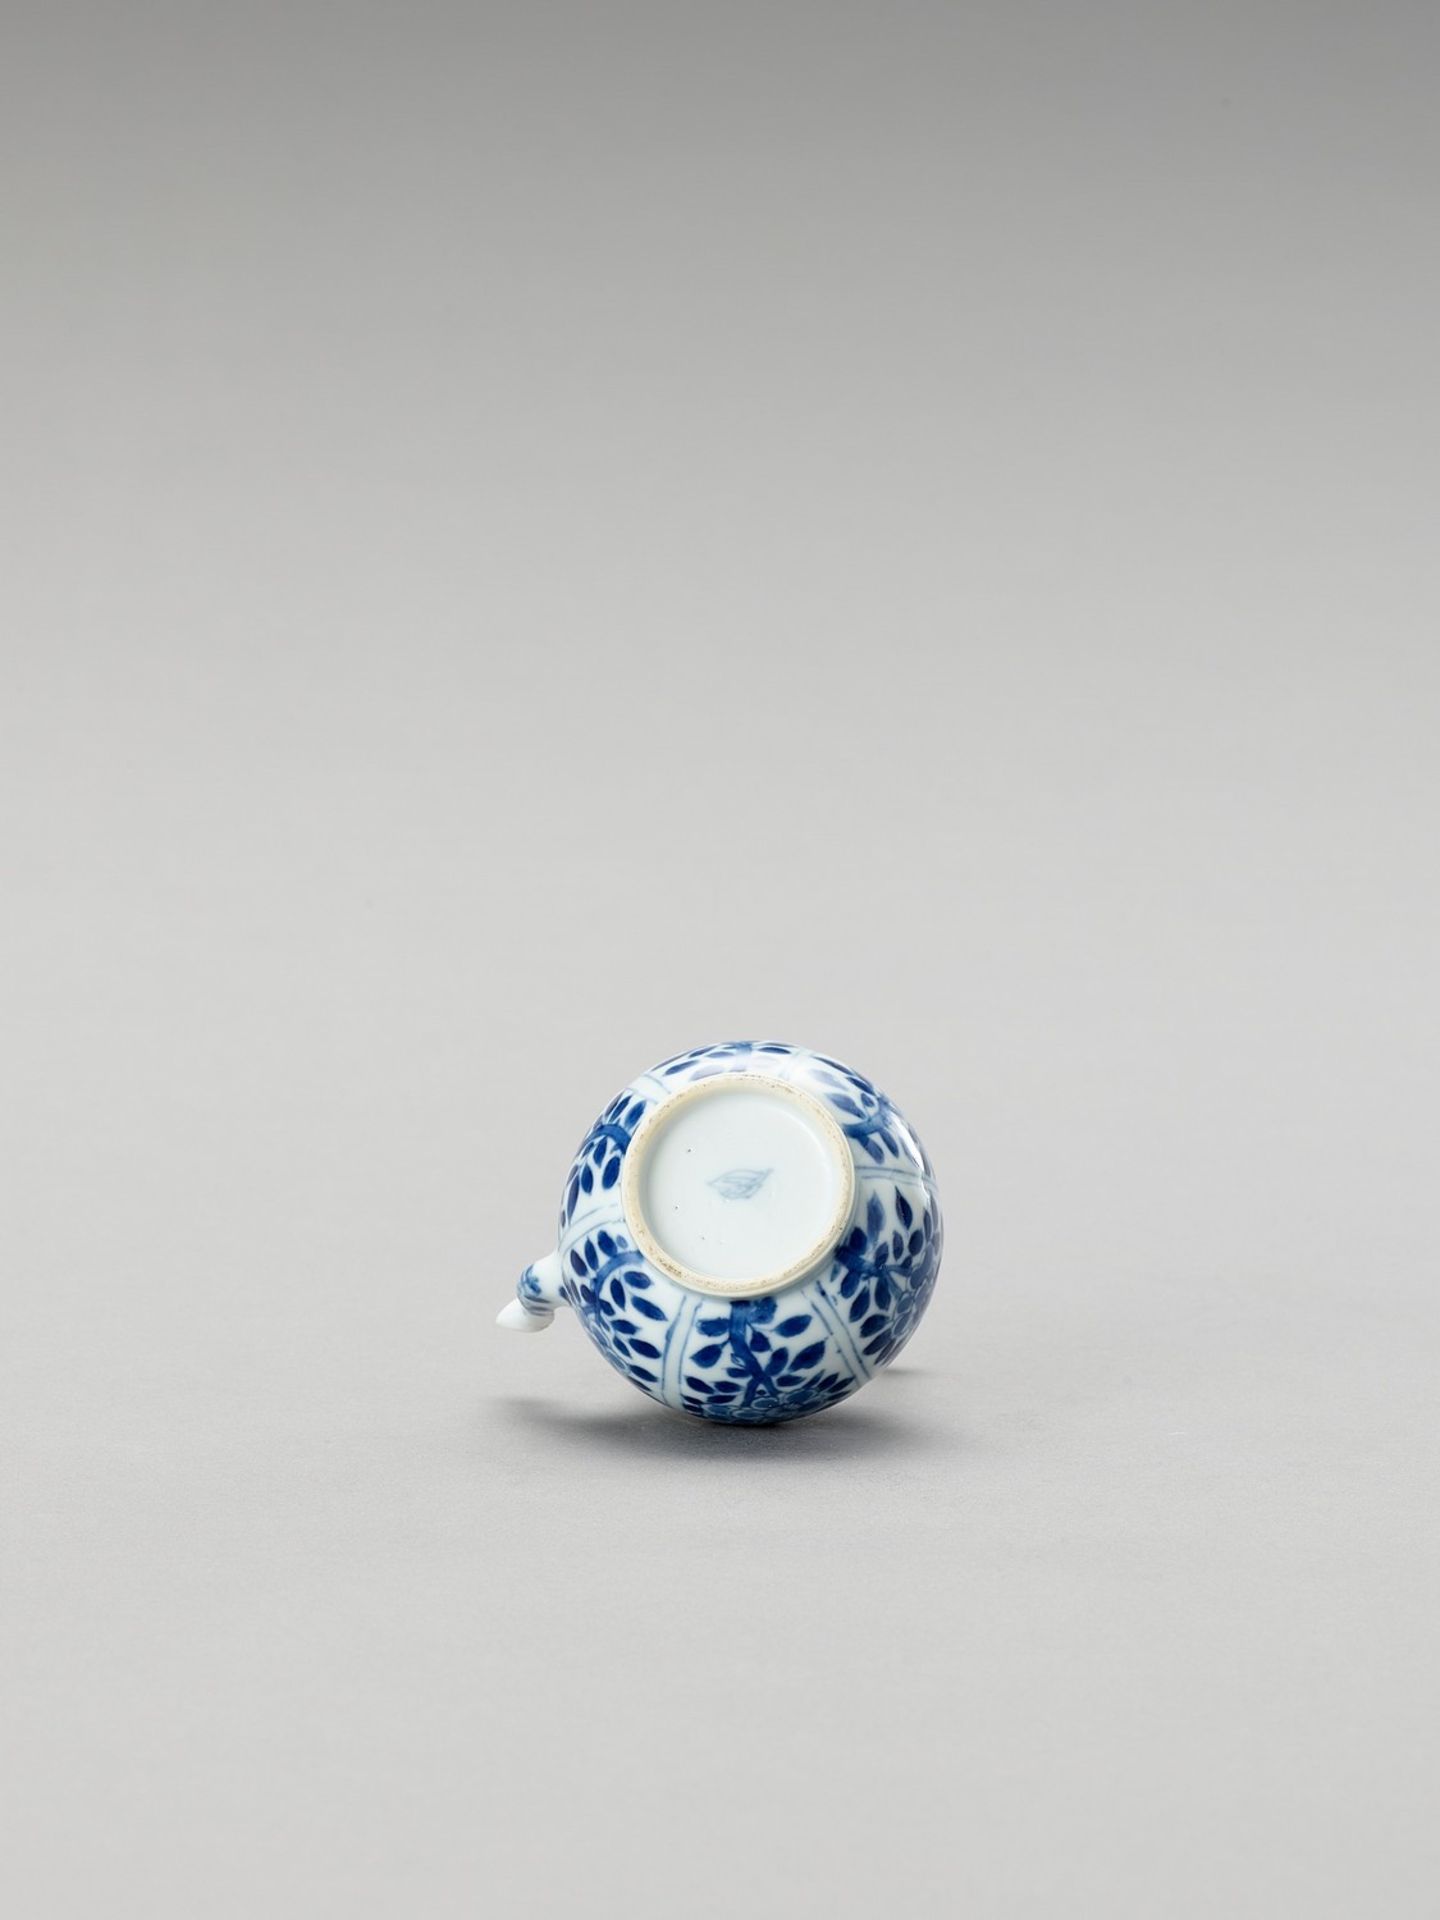 A MINIATURE BLUE AND WHITE PORCELAIN TEAPOT - Image 6 of 6